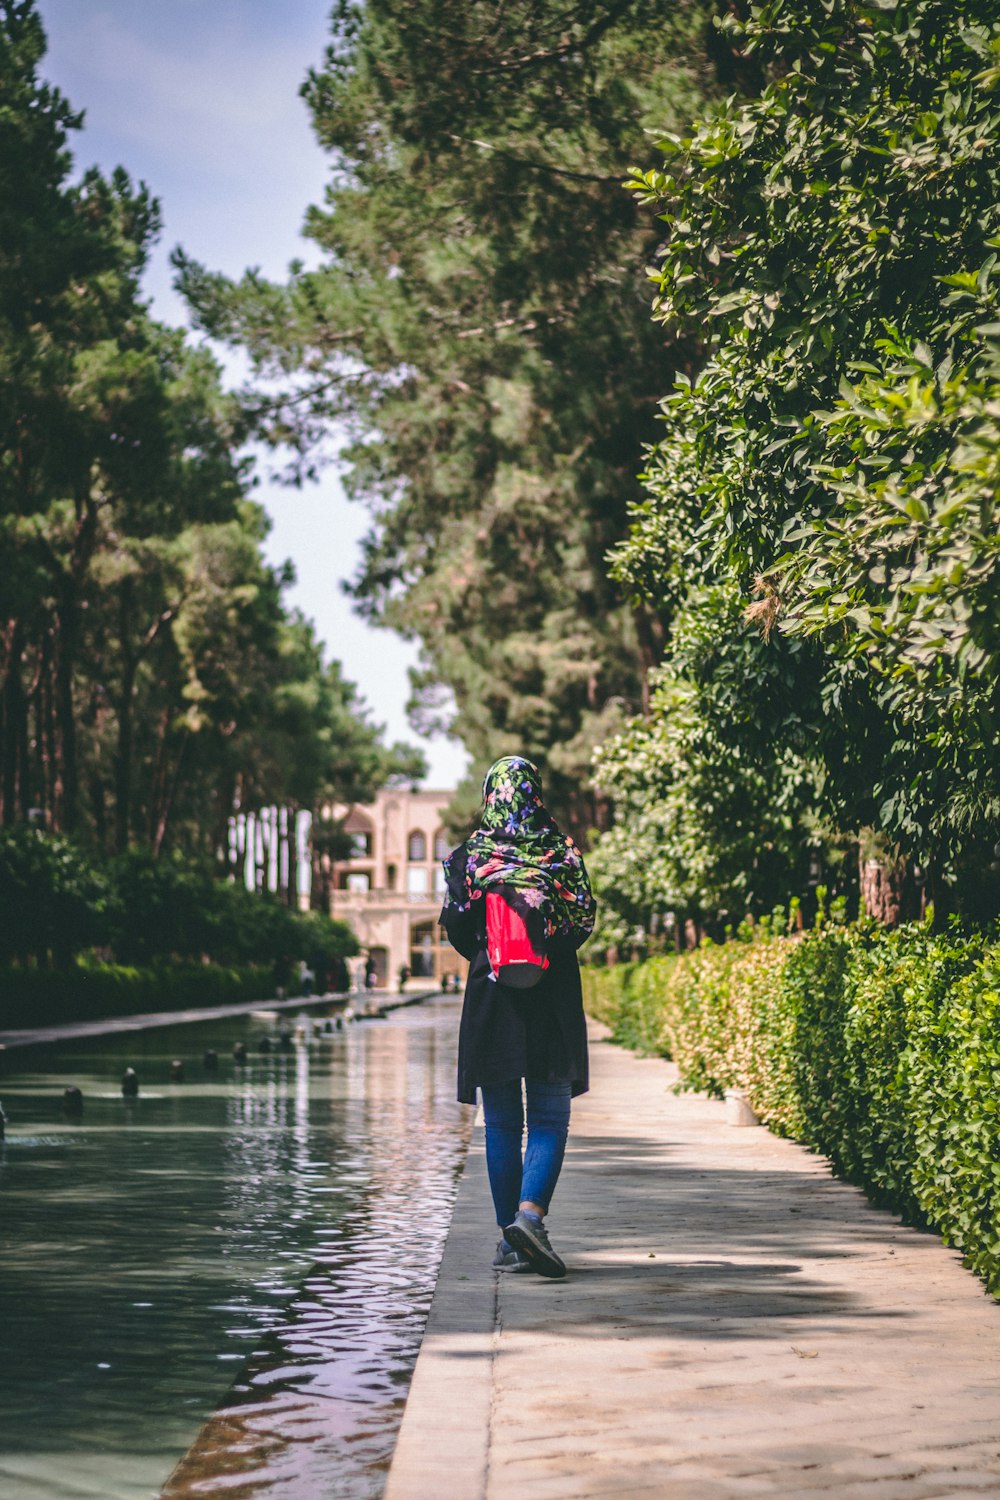 woman in black top walking by hedge and body of water